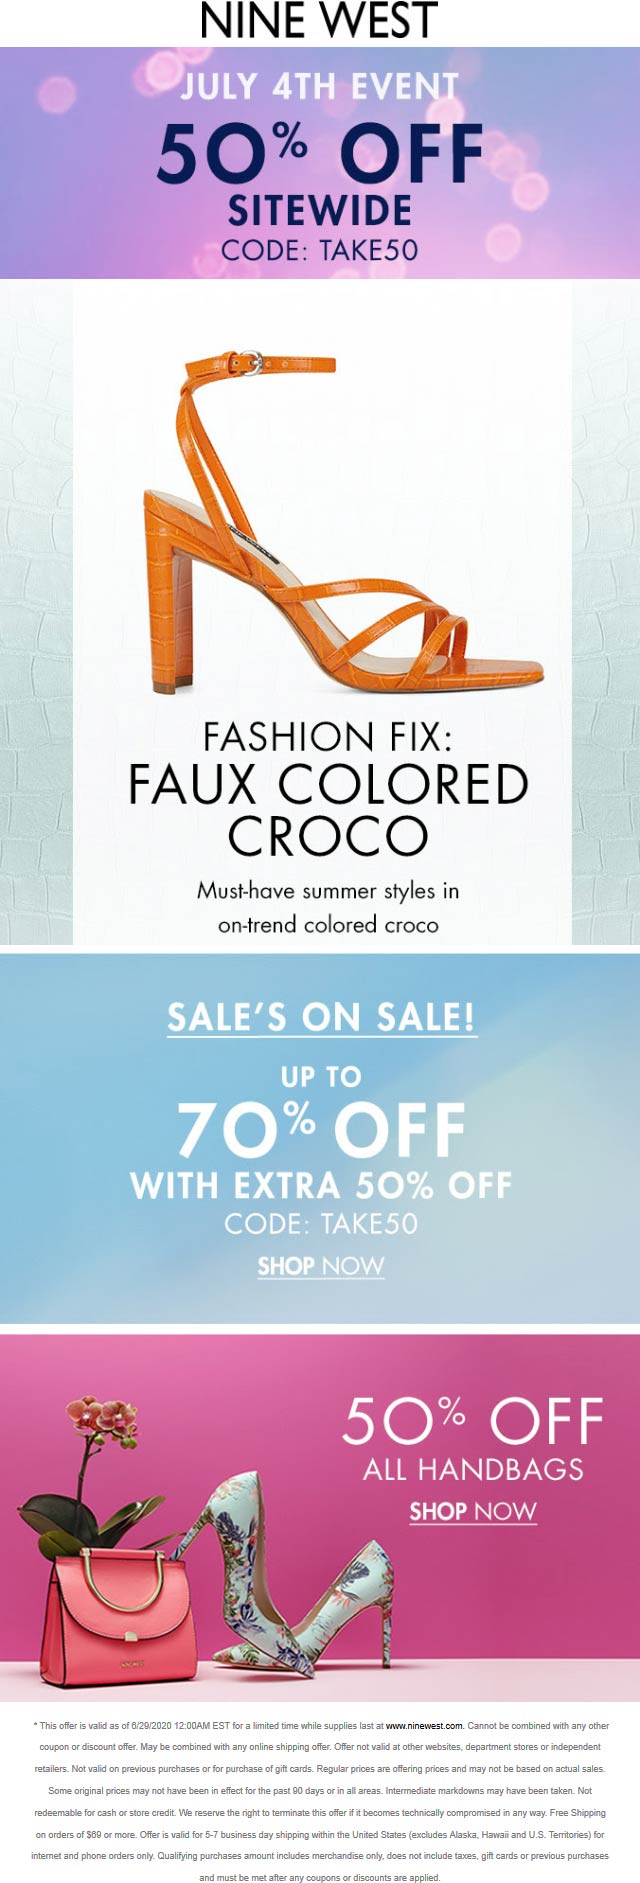 Nine West stores Coupon  50% off everything online at Nine West shoes via promo code TAKE50 #ninewest